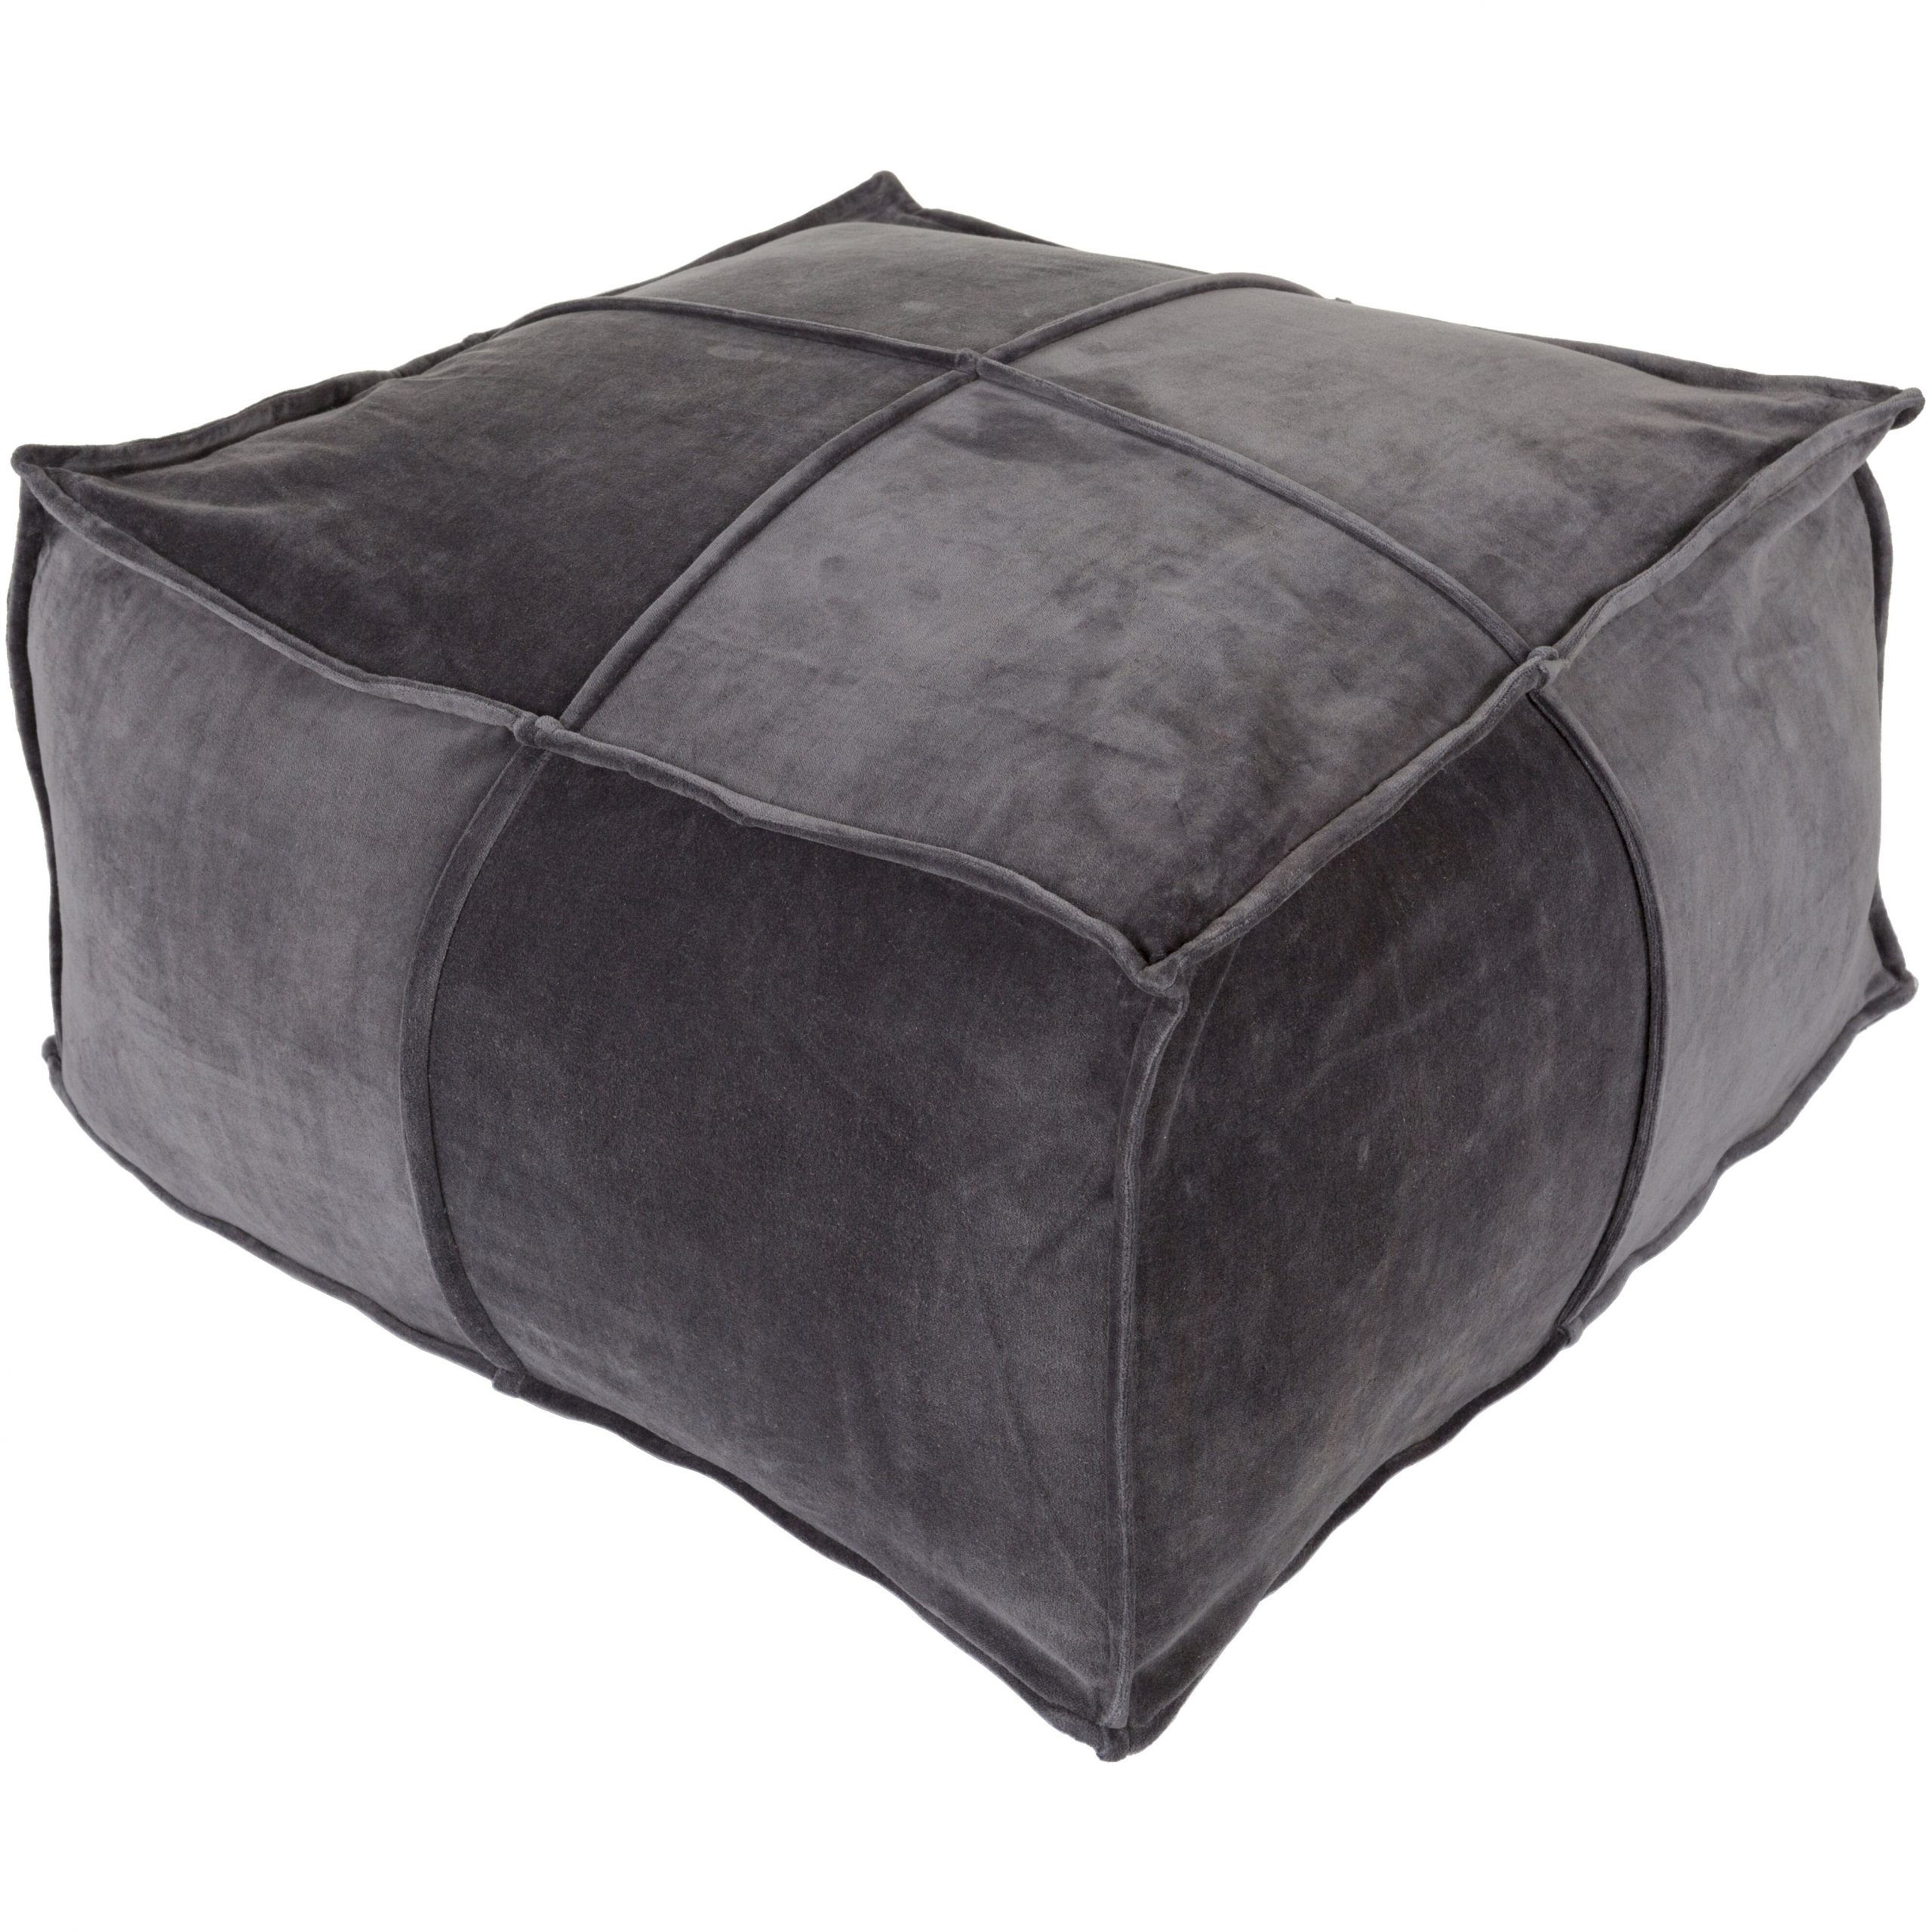 Surya Cotton Velvet Pouf Ottoman & Reviews | Wayfair Intended For Black And Natural Cotton Pouf Ottomans (View 9 of 20)